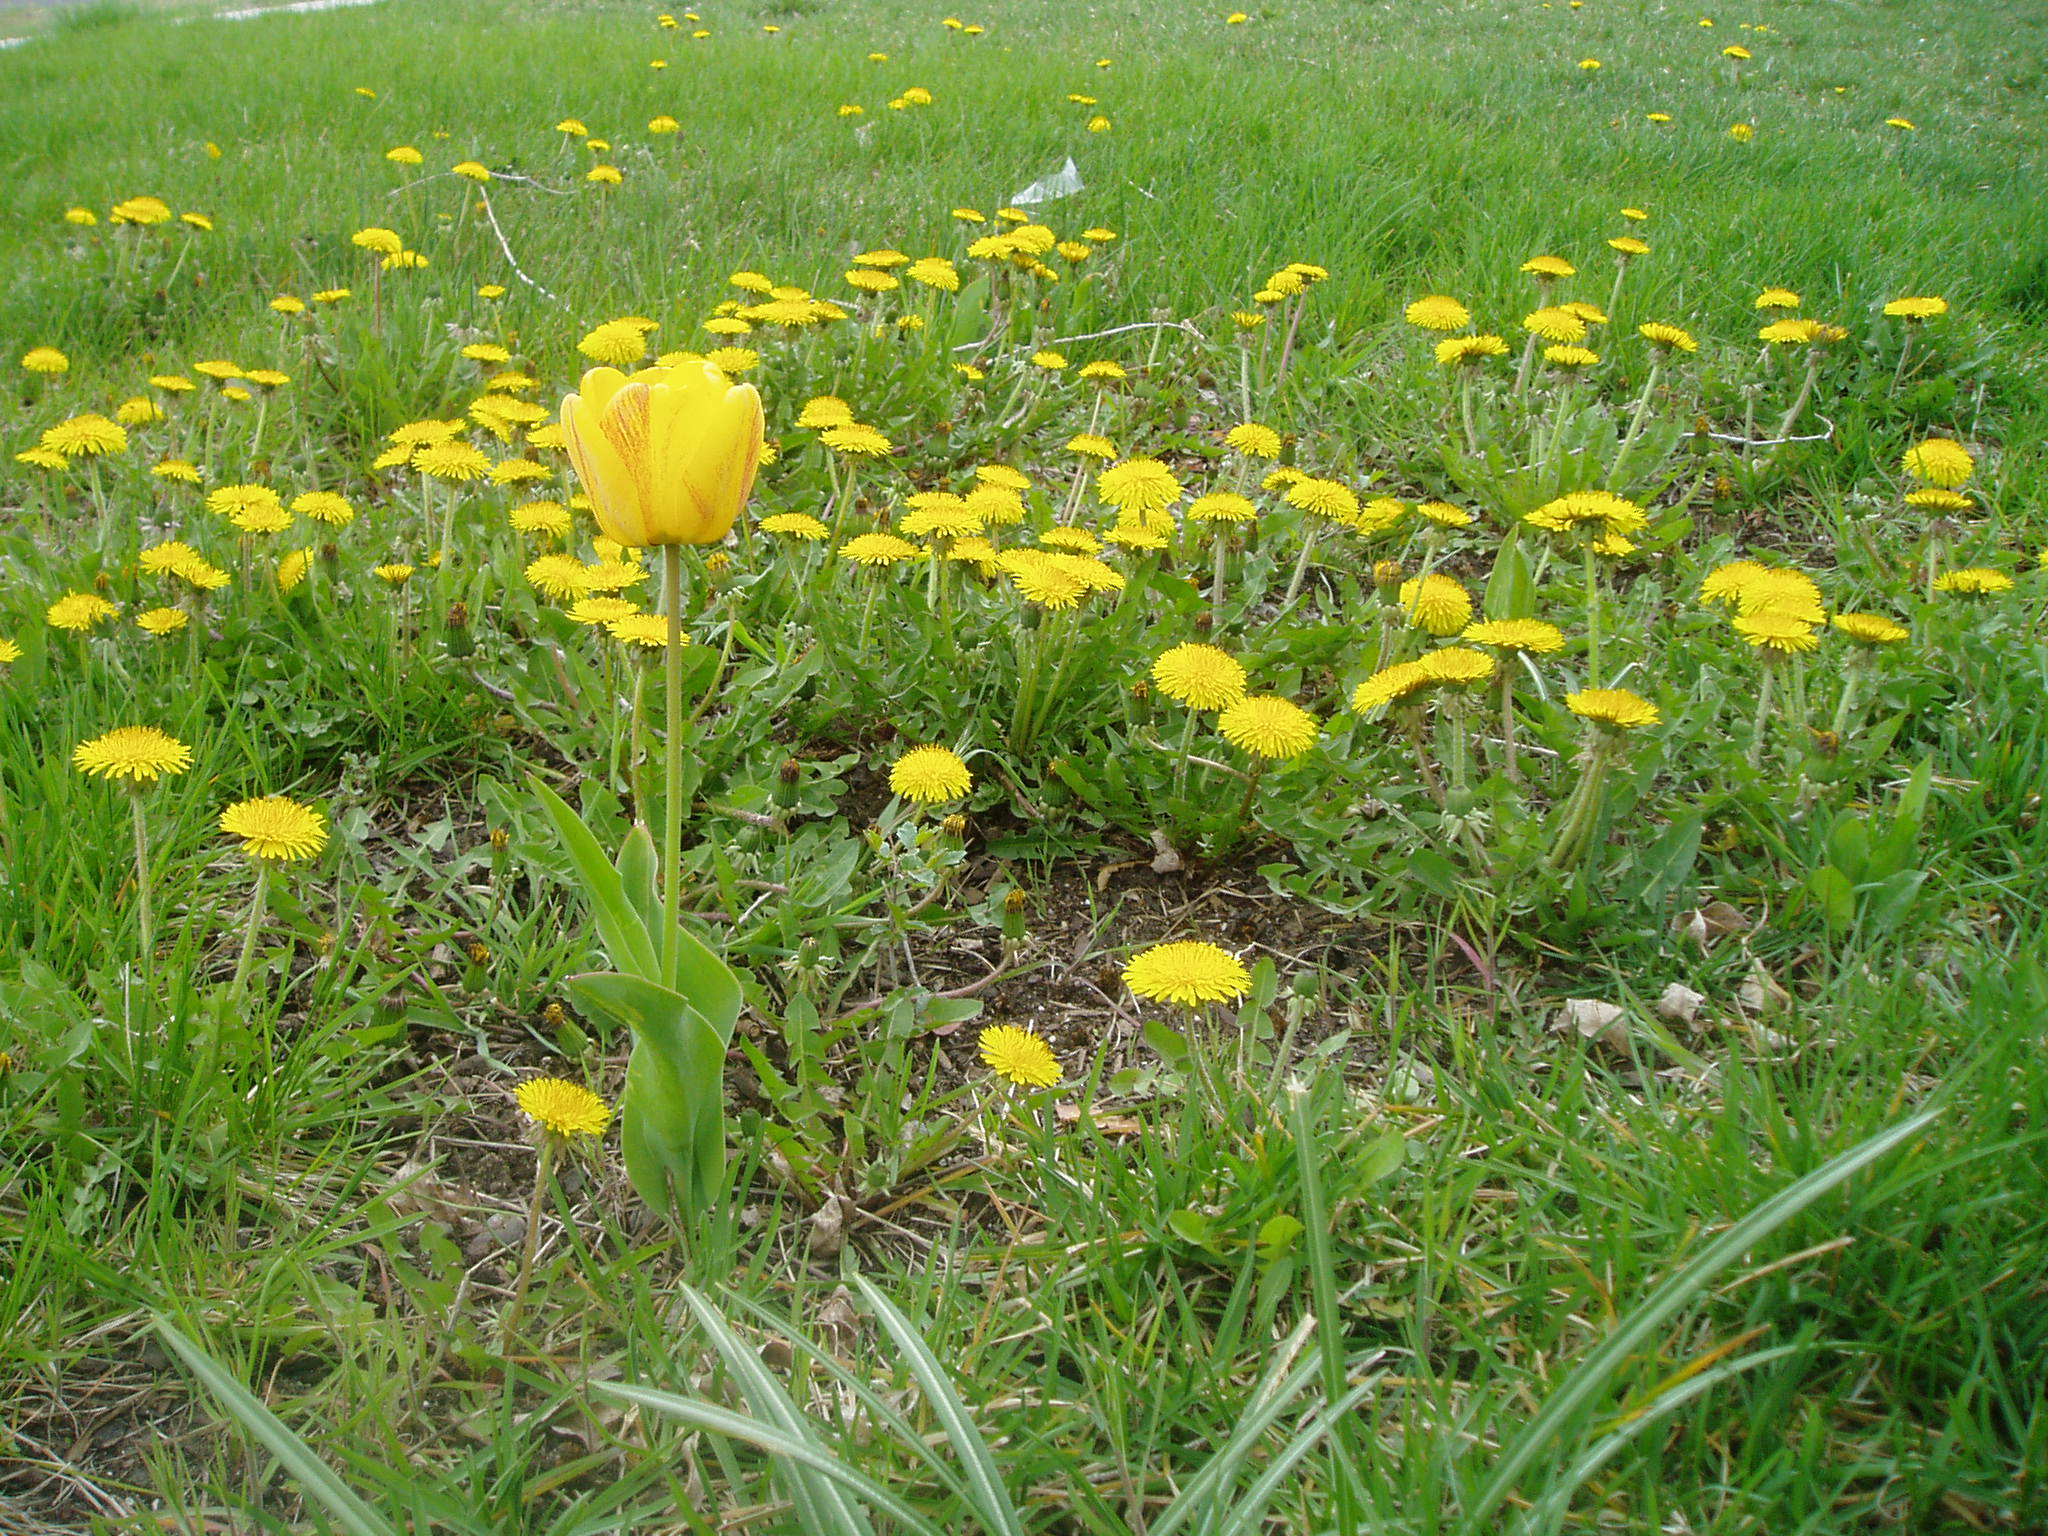 Yellow tulip surrounded by dandelions.